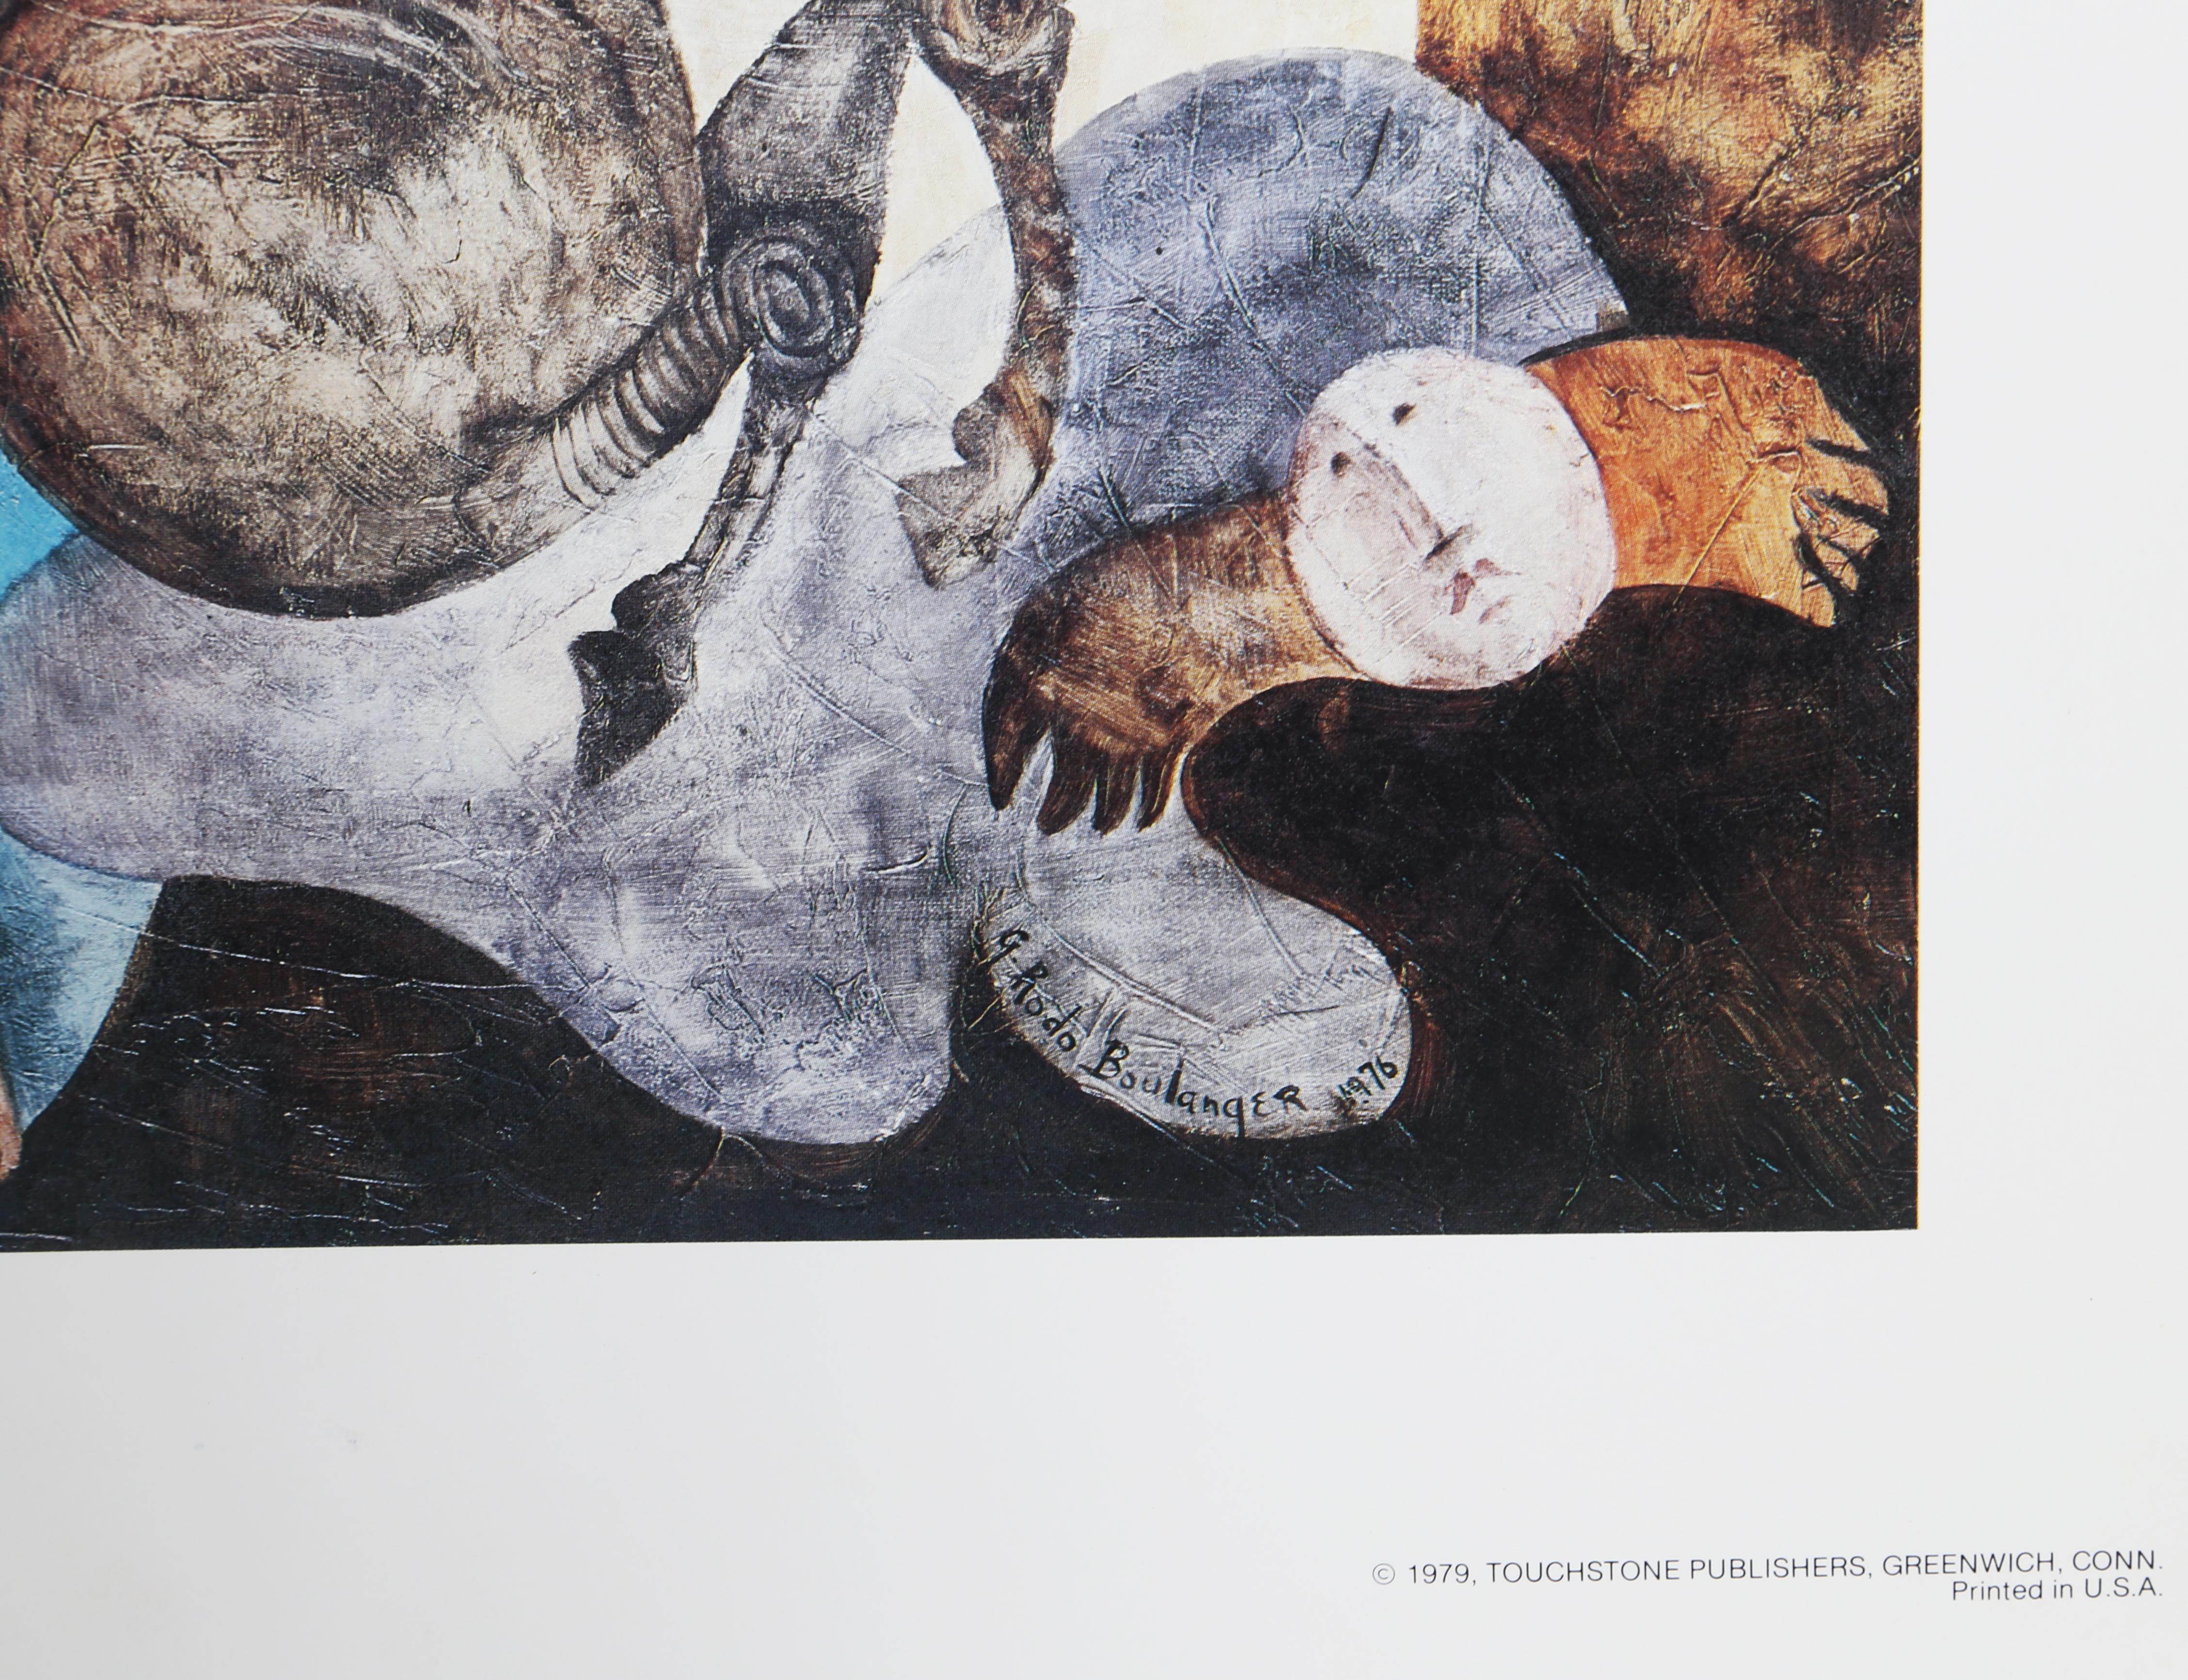 In a style similar to Modigliani, Boulanger depicts a saint holding a baby and crossing the water on the back of a ram (Belier in French). This poster was printed as a reproduction of the original painting by Touchstone Publishers.

Adoration du